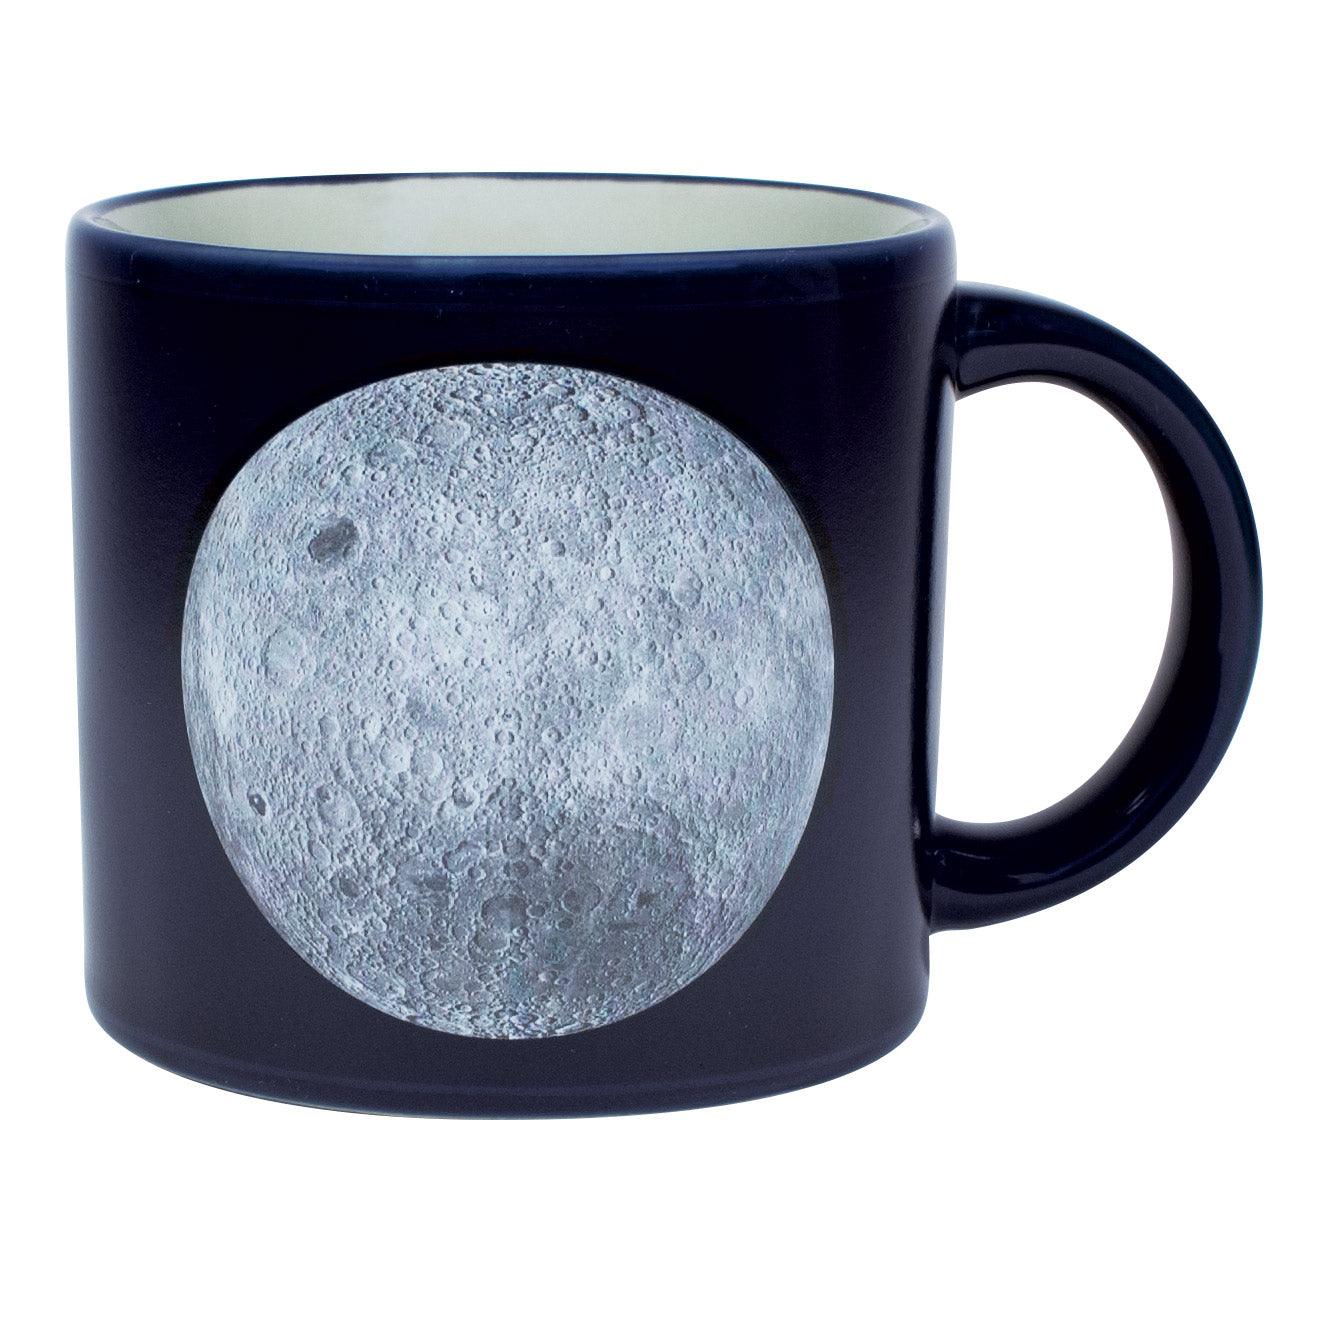 Heat-Changing Planet Mug: Coffee cup with a model of the Solar System.